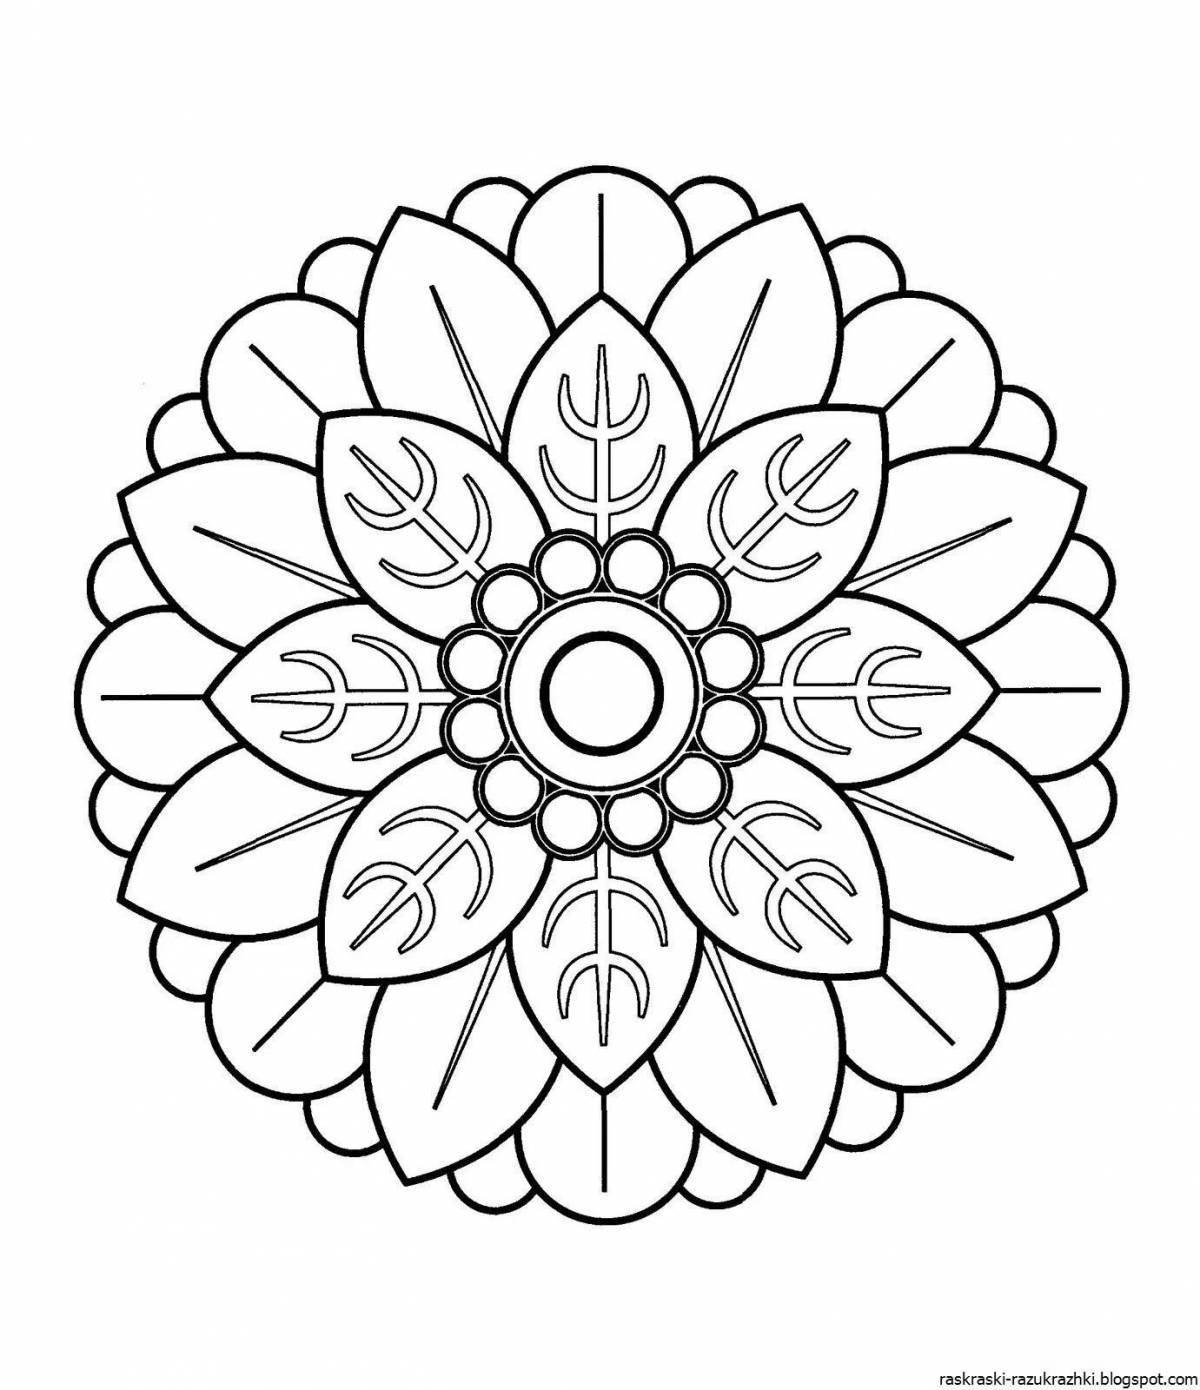 Adorable light pattern coloring page